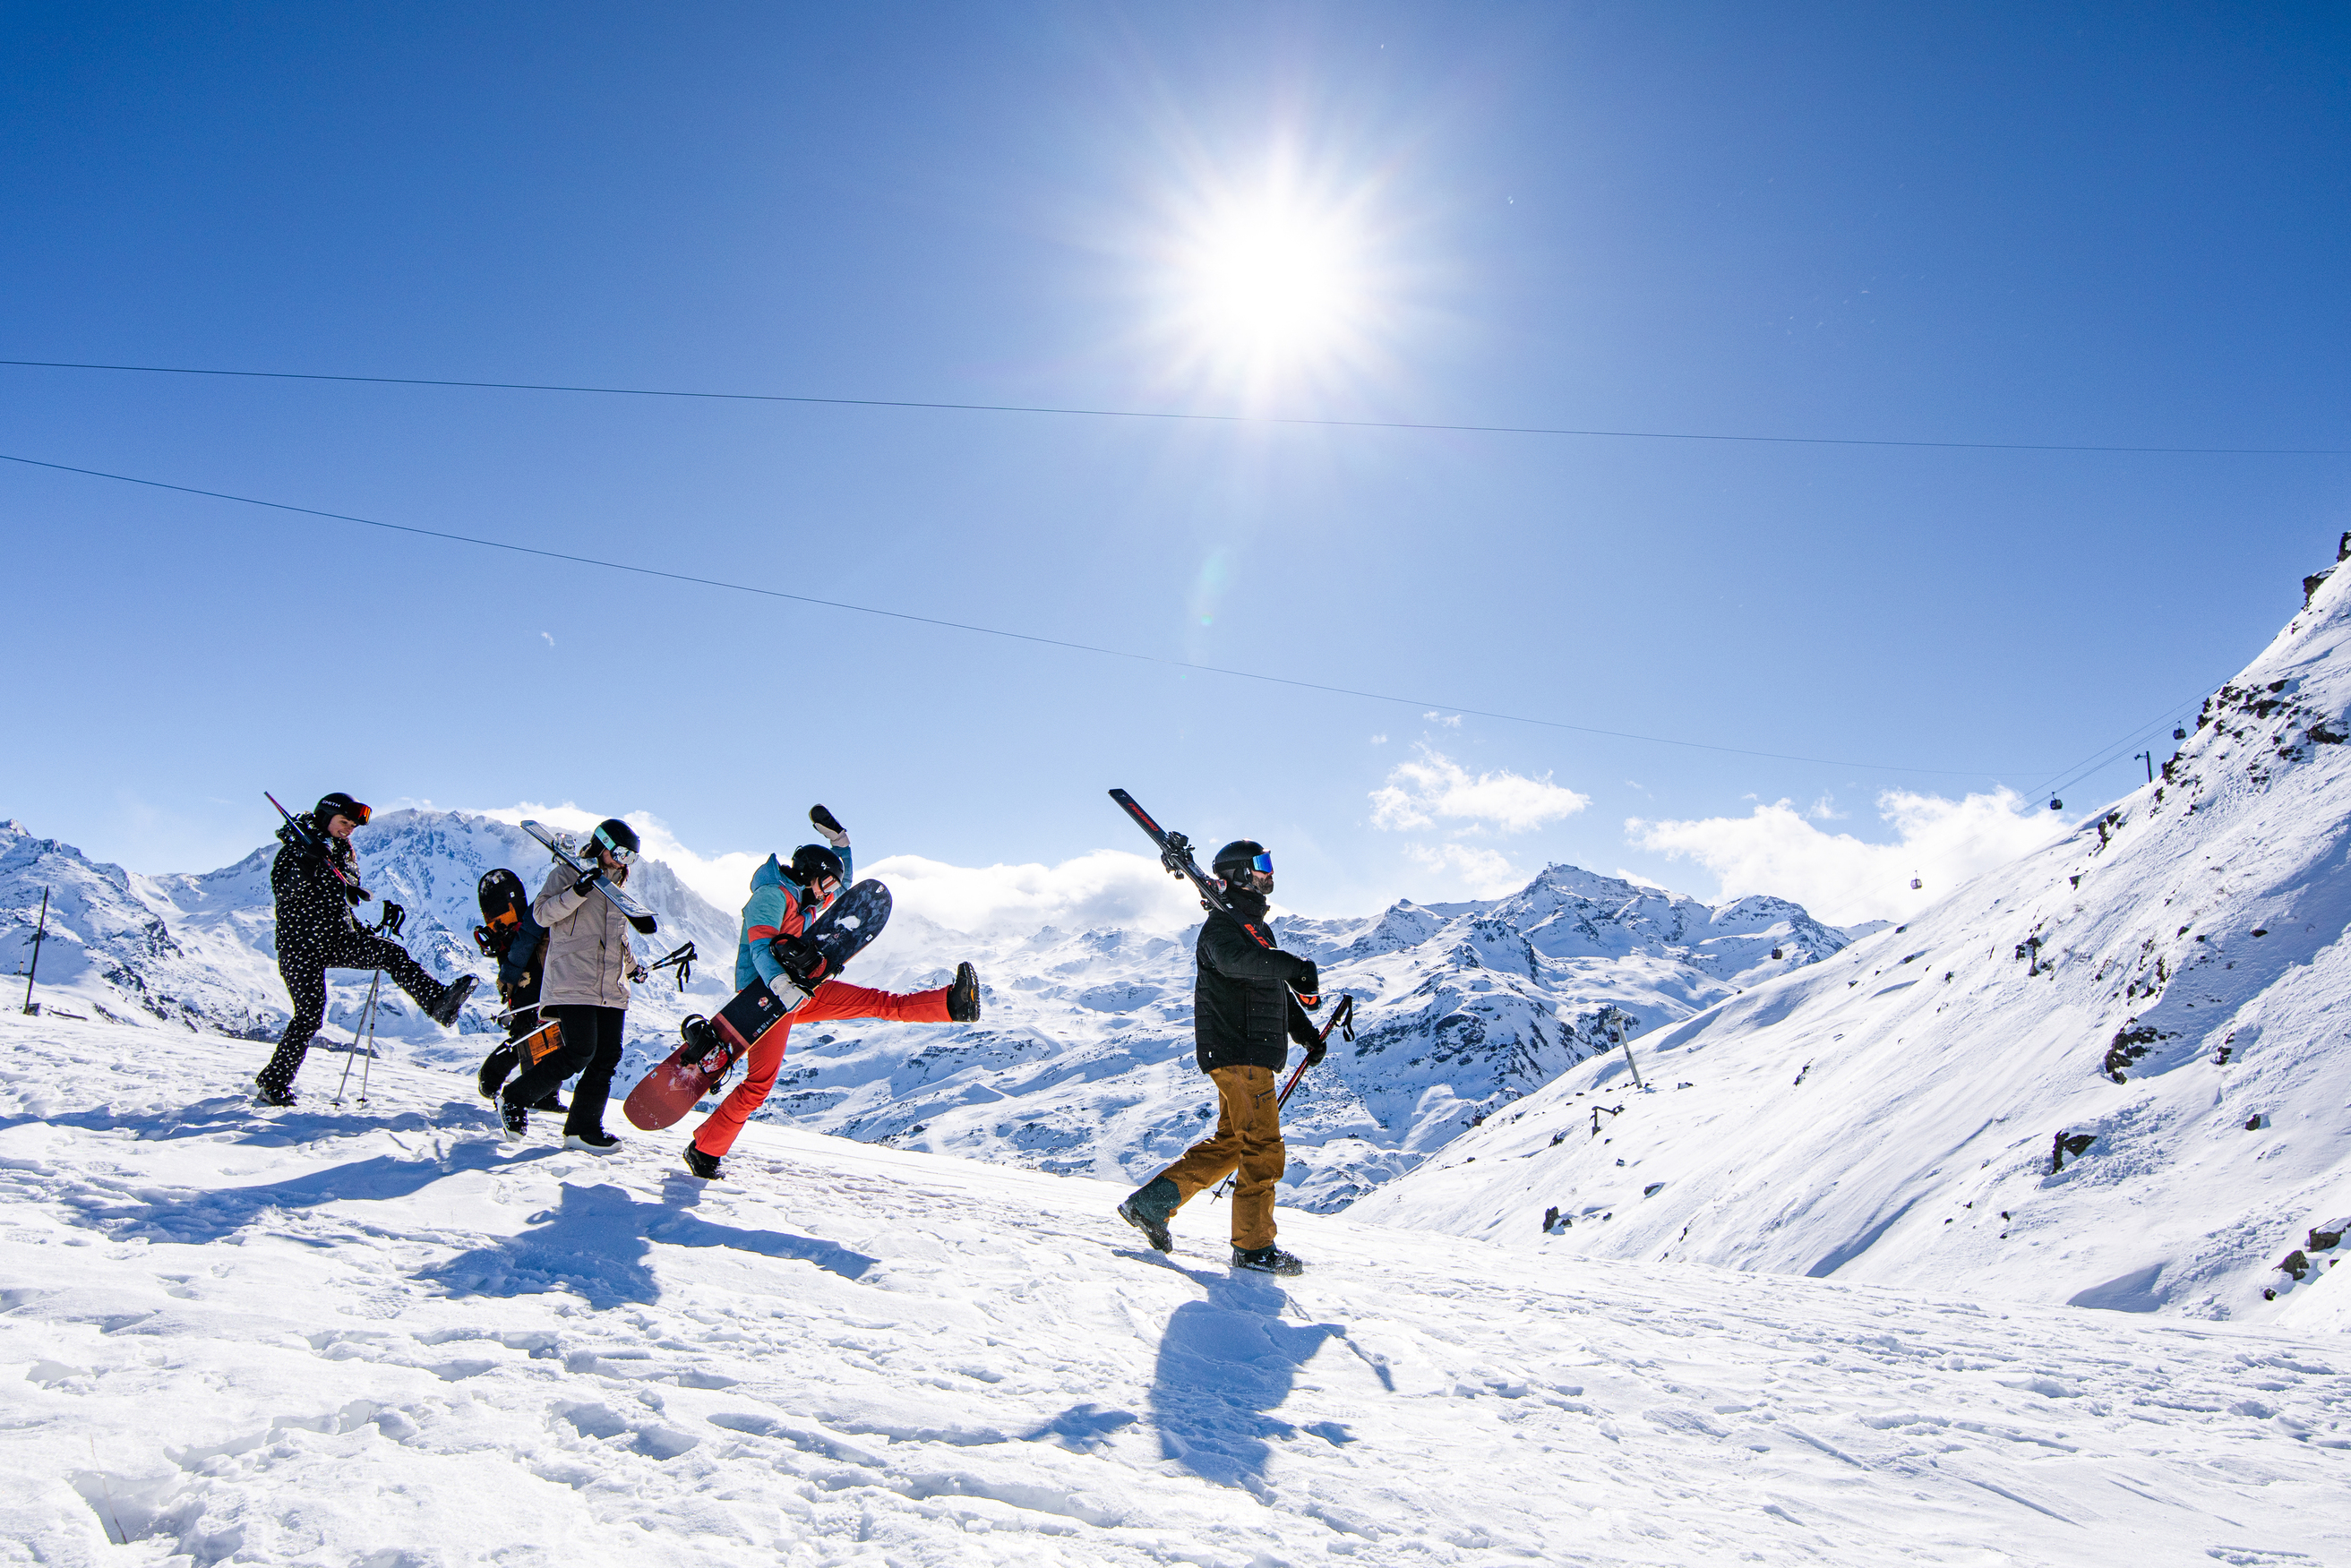 How to Decide How Many Days You Need for a Ski Trip